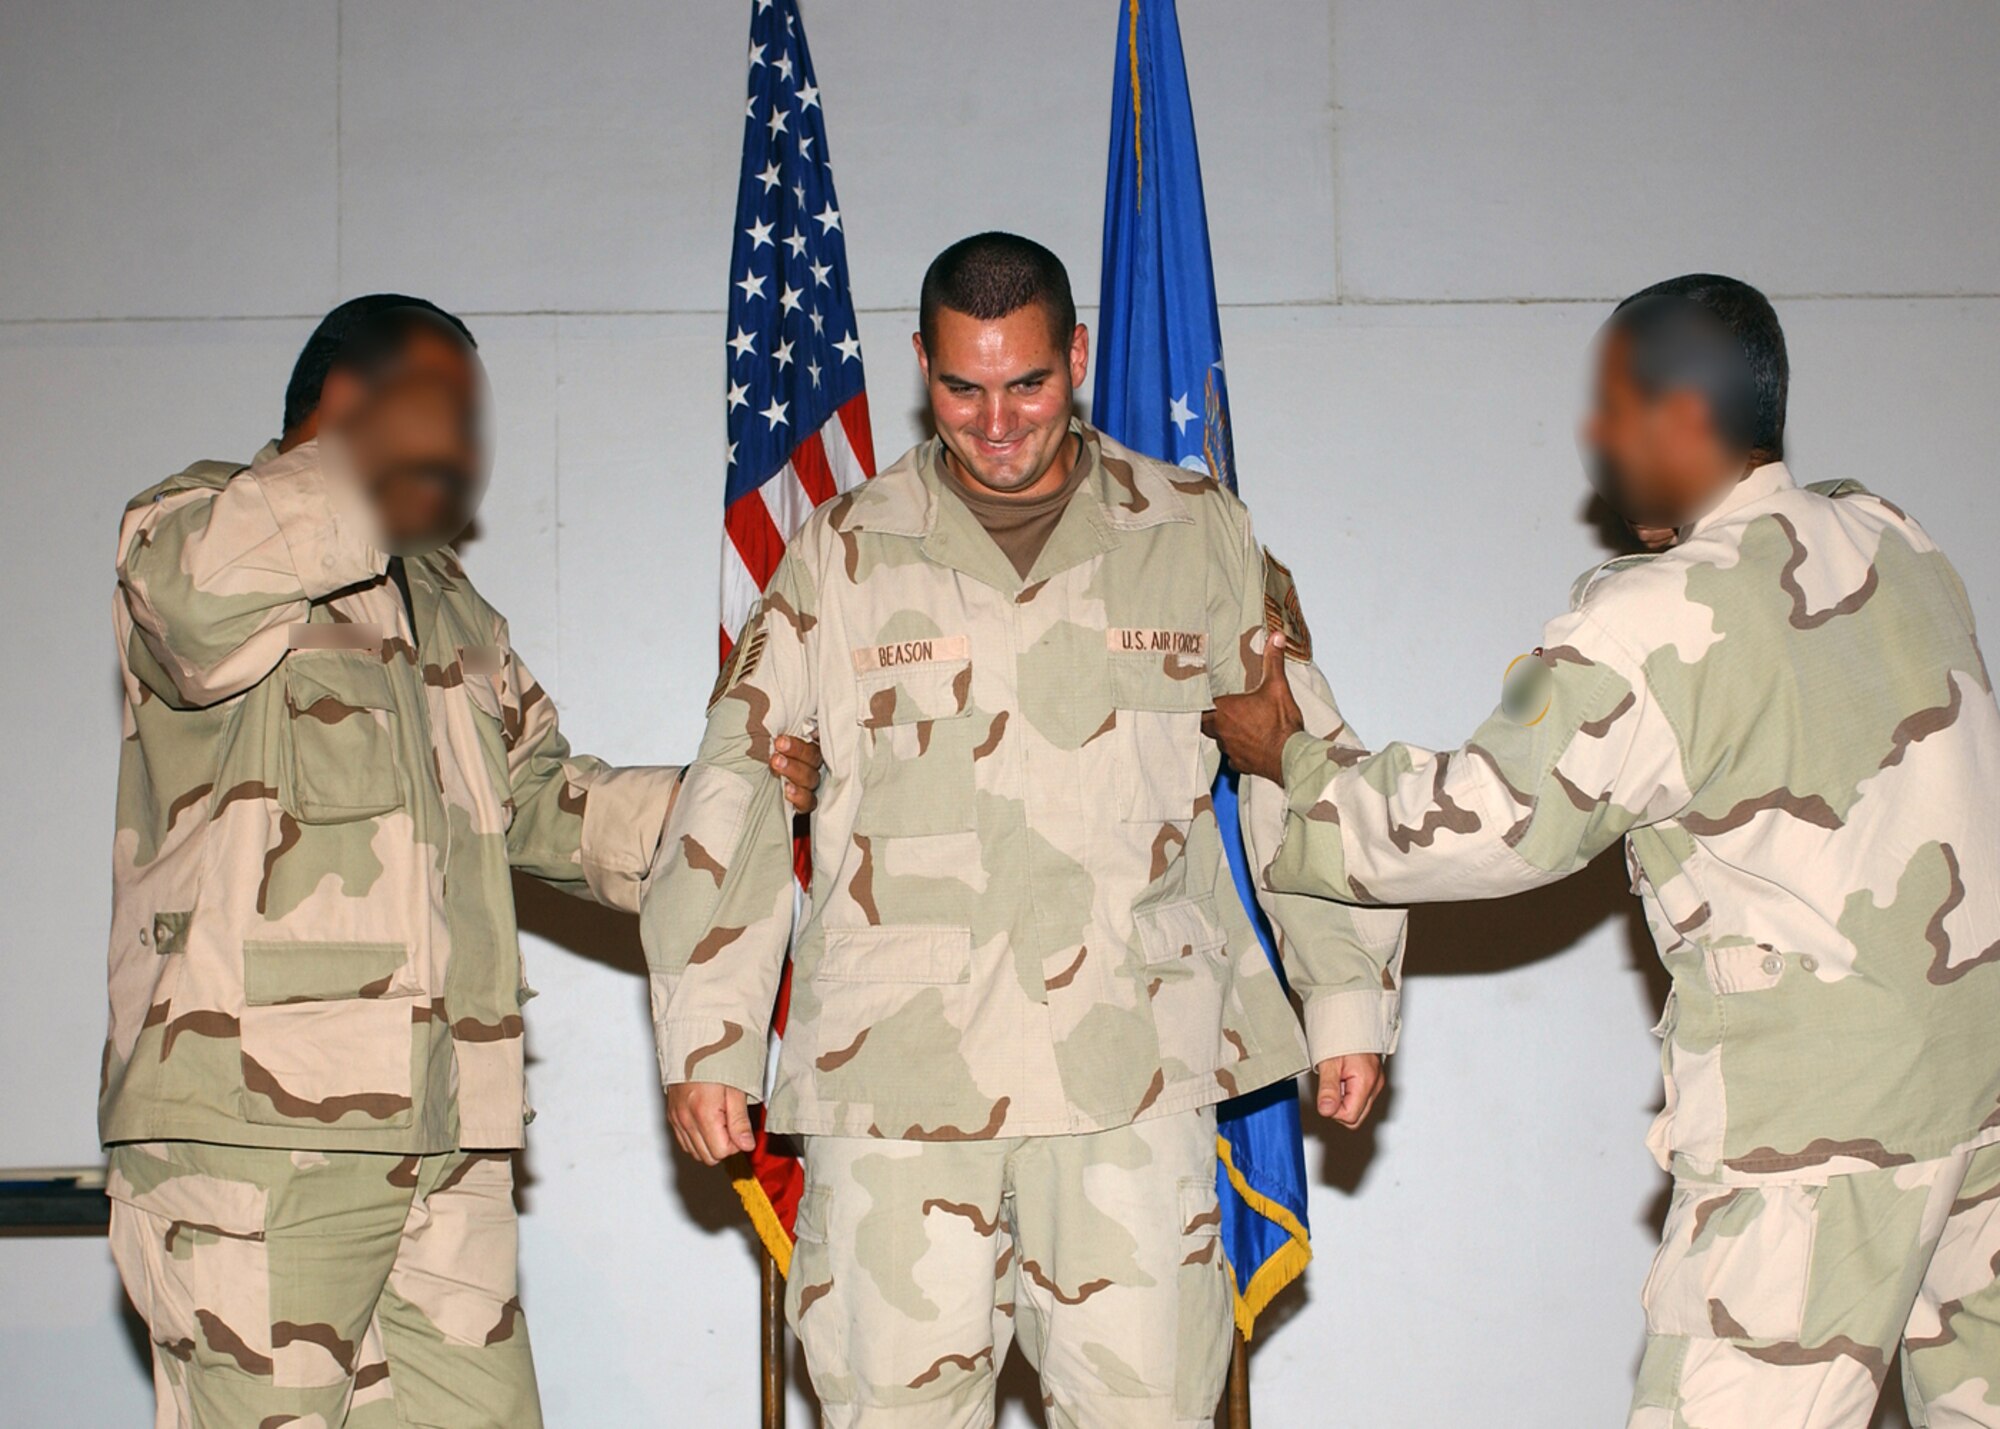 TALLIL AIR BASE, Iraq -- Two Iraqi airmen tack new stripes on Master Sgt. Bubba Beason during his promotion ceremony here.  Sergeant Beason is the airmen's hydraulics instructor.  He said he wanted the students to tack on his stripes because they and the rest of their countrymen are part of the reason he got promoted in the first place.  Sergeant Beason is assigned to the 777th Expeditionary Aircraft Maintenance Squadron.  The students' faces are blurred for their protection.  (Altered U.S. Air Force photo by Master Sgt. Maurice Hessel)